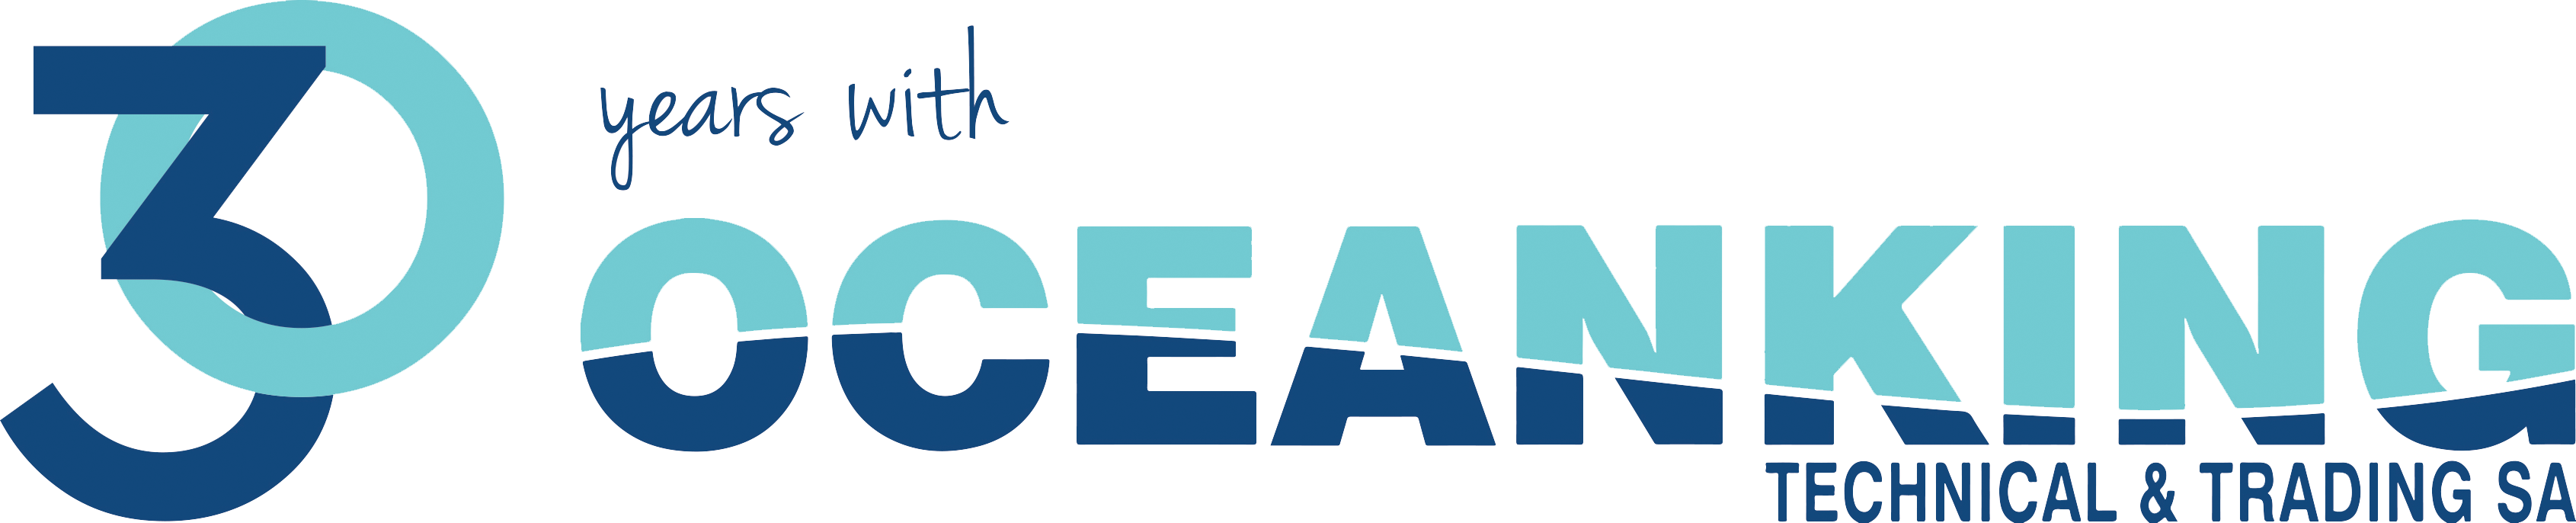 30 years with oceanking logo